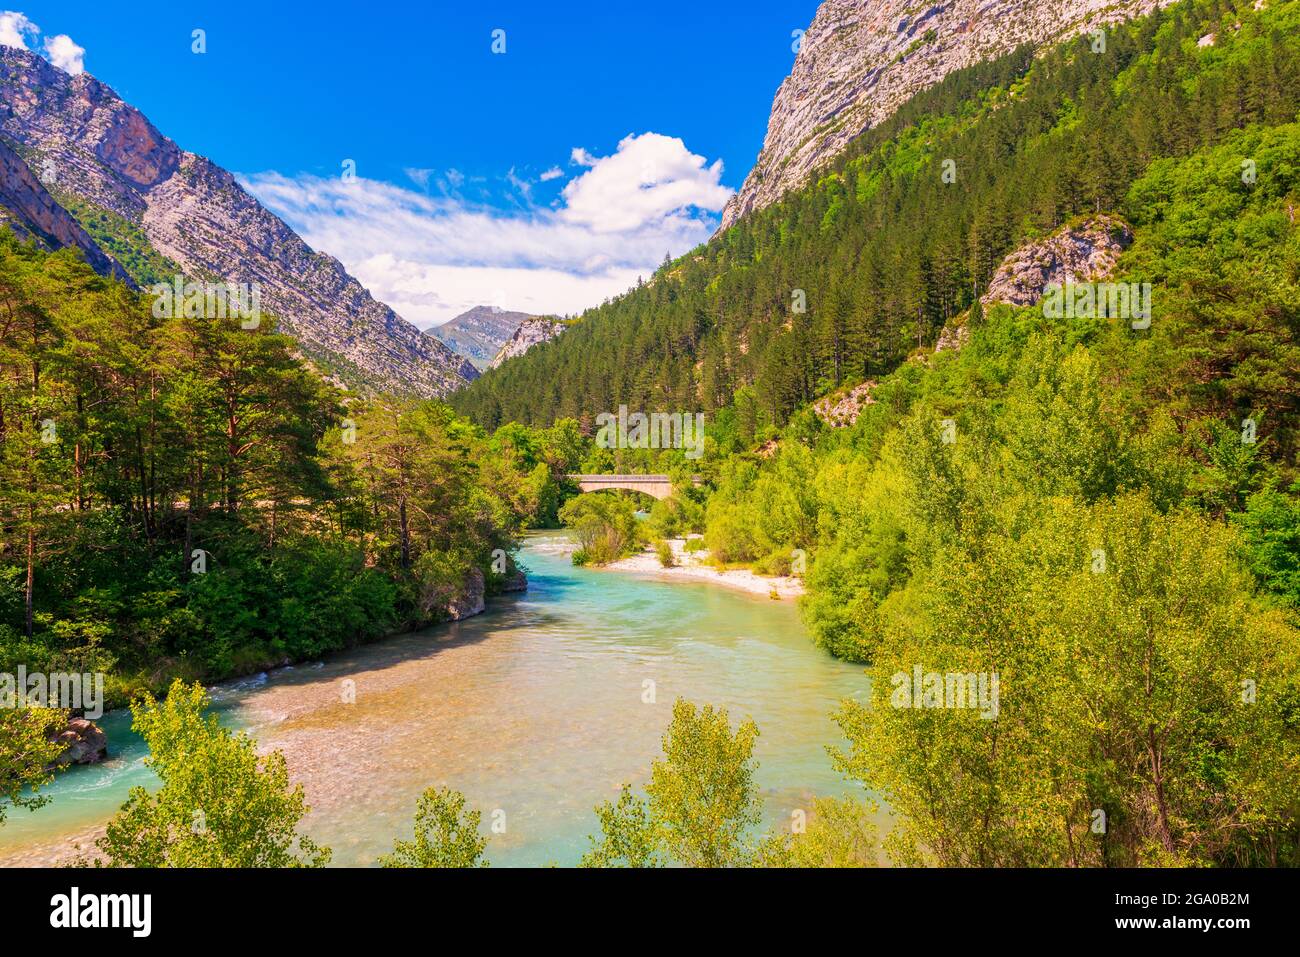 Bridge crossing the Verdon River in The Verdon Gorge, a river canyon located in the Provence region, Southeastern France Stock Photo